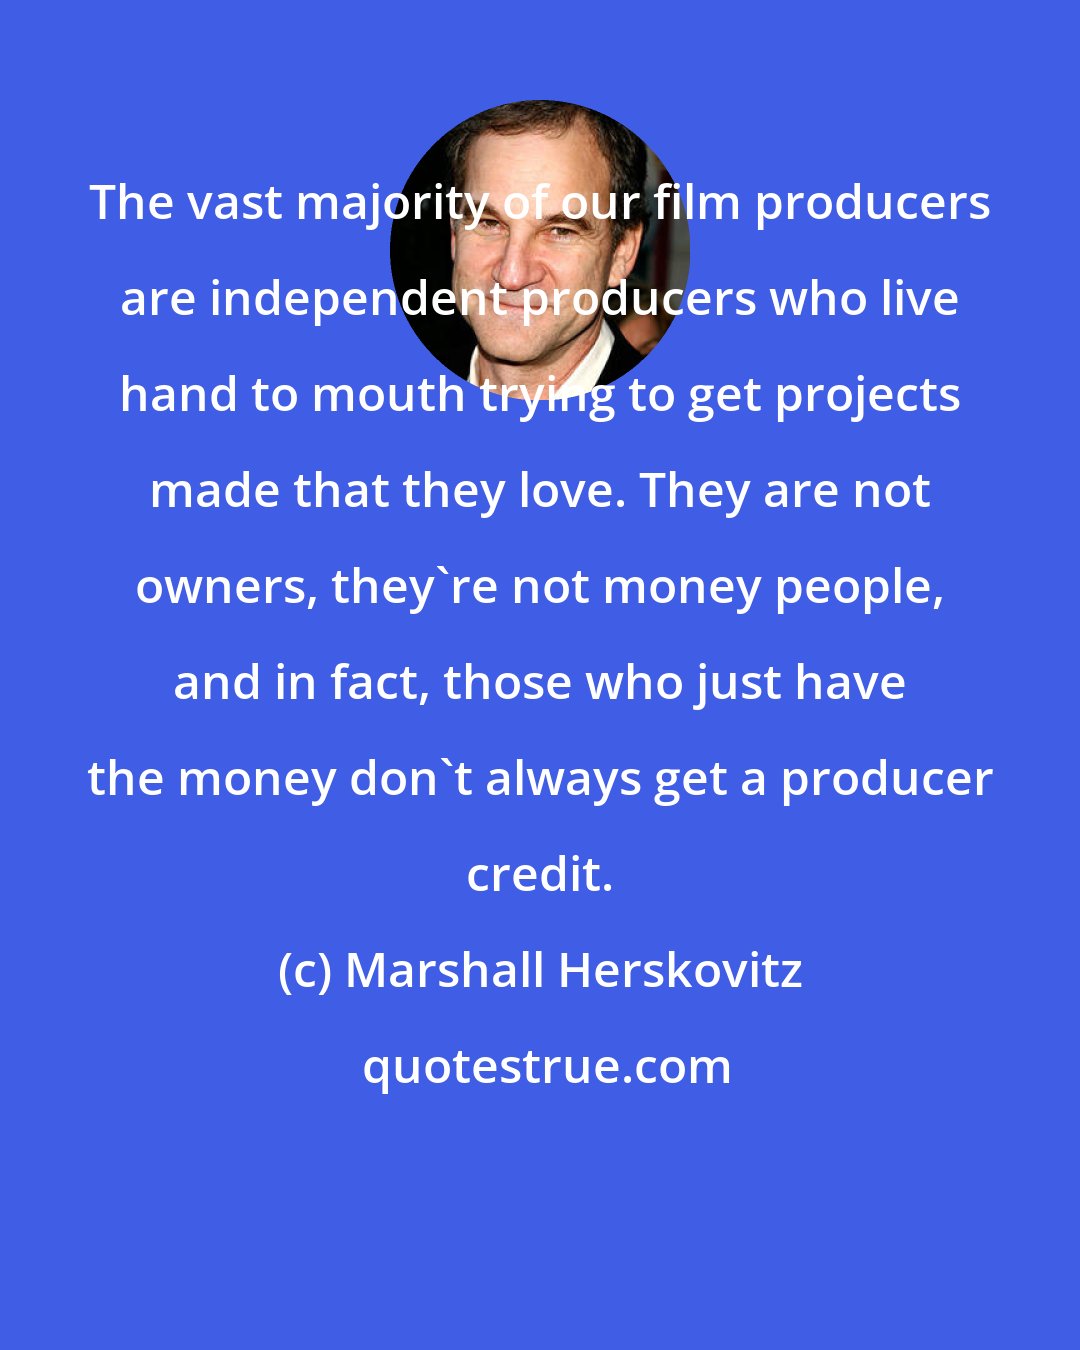 Marshall Herskovitz: The vast majority of our film producers are independent producers who live hand to mouth trying to get projects made that they love. They are not owners, they're not money people, and in fact, those who just have the money don't always get a producer credit.